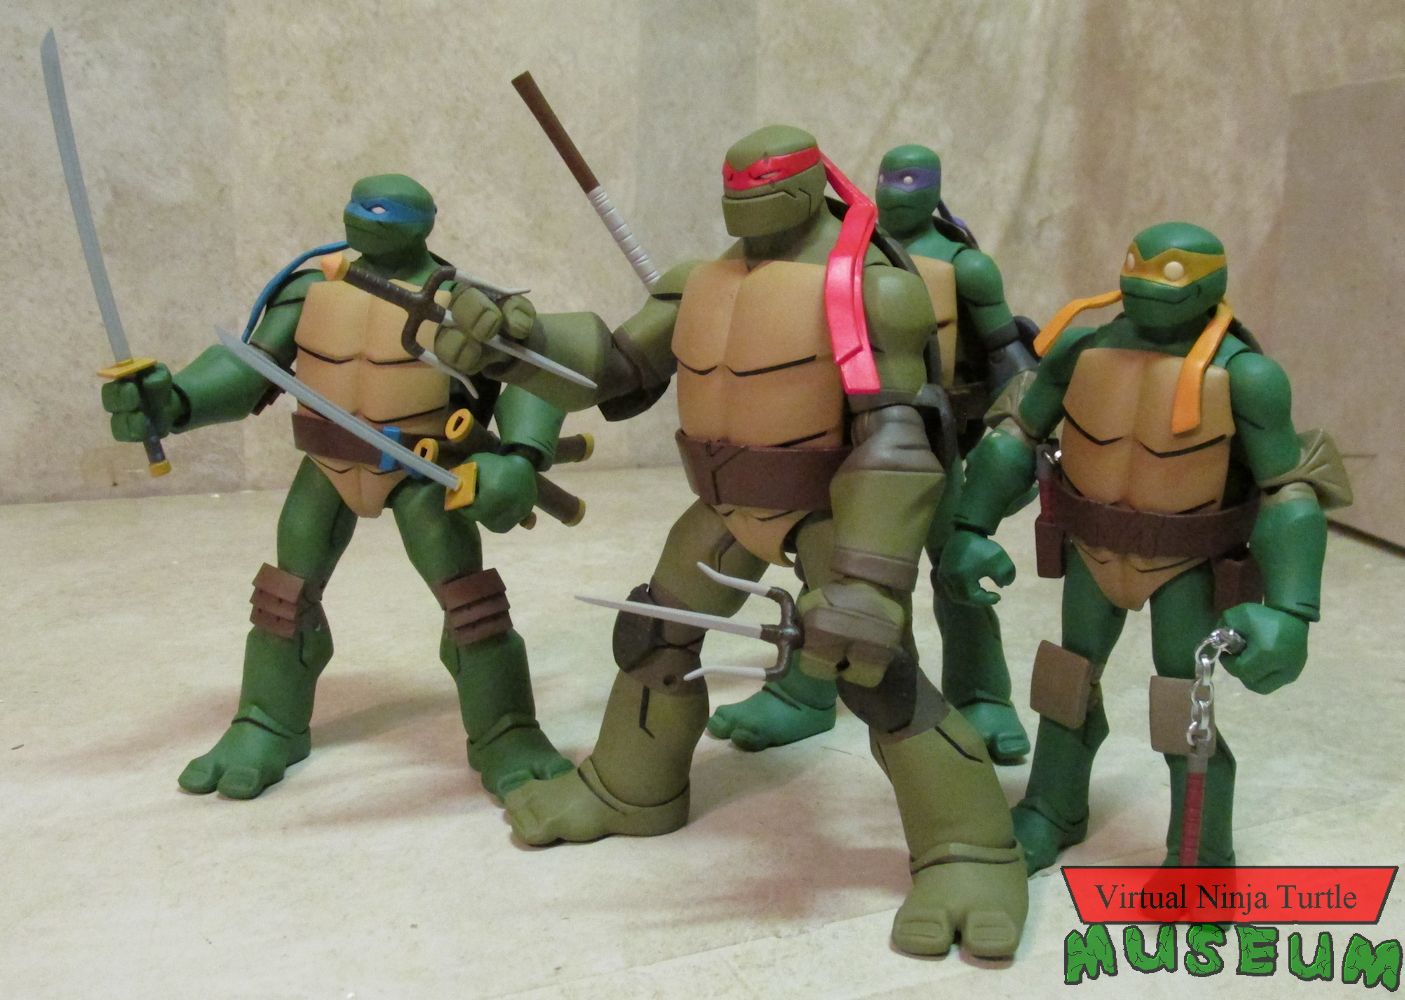 Turtles ready for action